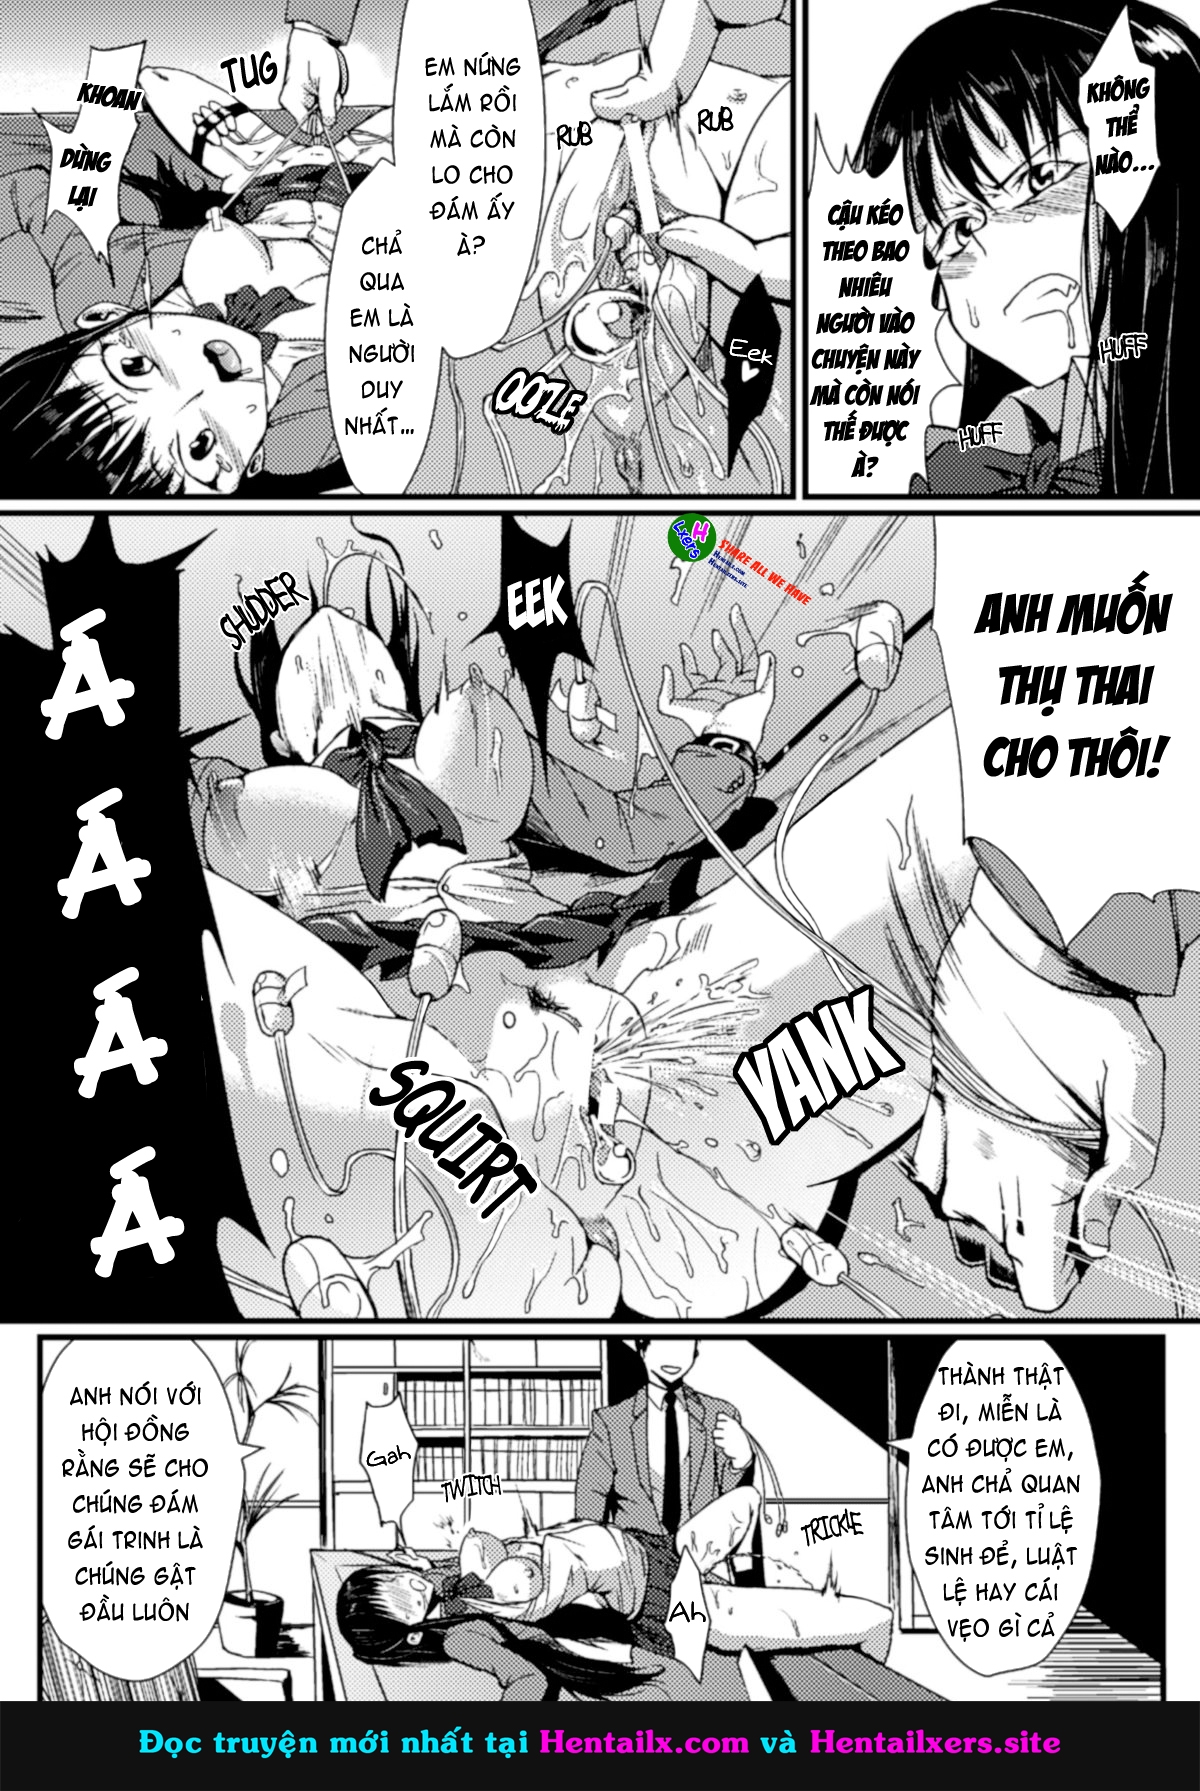 Xem ảnh Drop Out - Chapter 9 END - 1606921463353_0 - Hentai24h.Tv